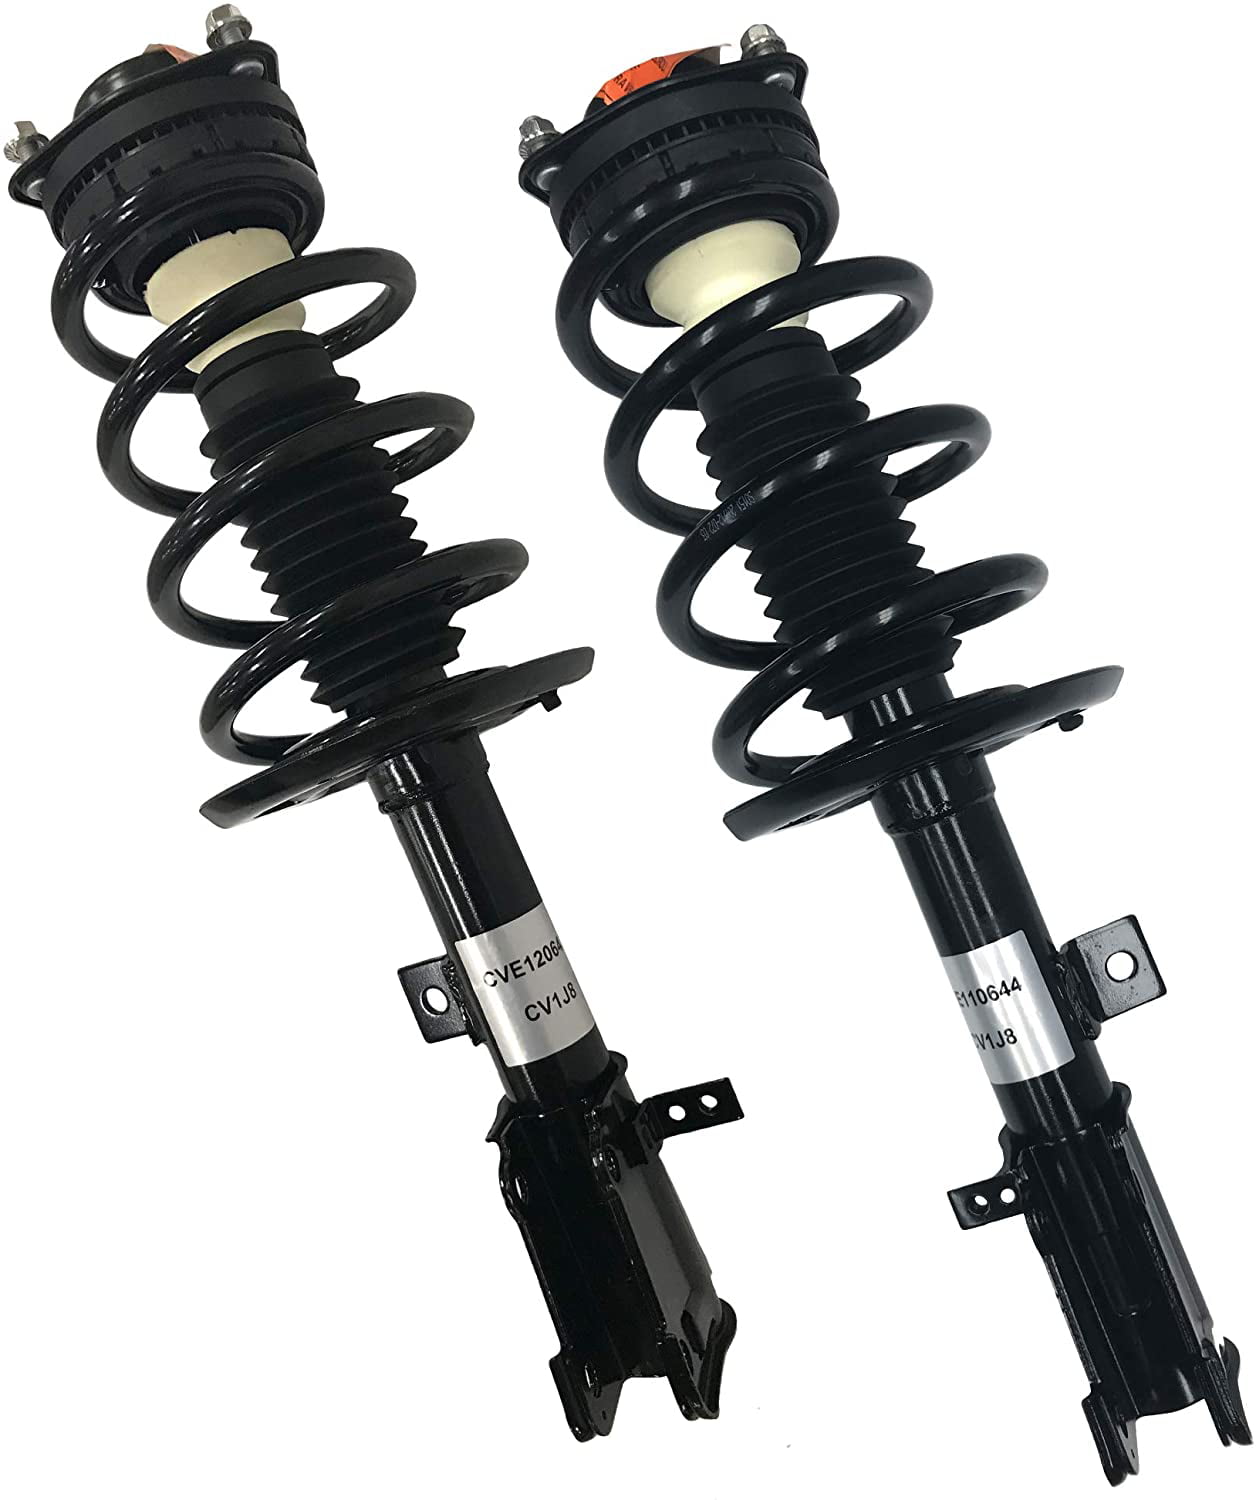 Ai CAR FUN 1 Pair 172509 172510 Front Strut Shocks Absorber Complete Shock Struts and Coil Springs for 2009-2016 Dodge Journey